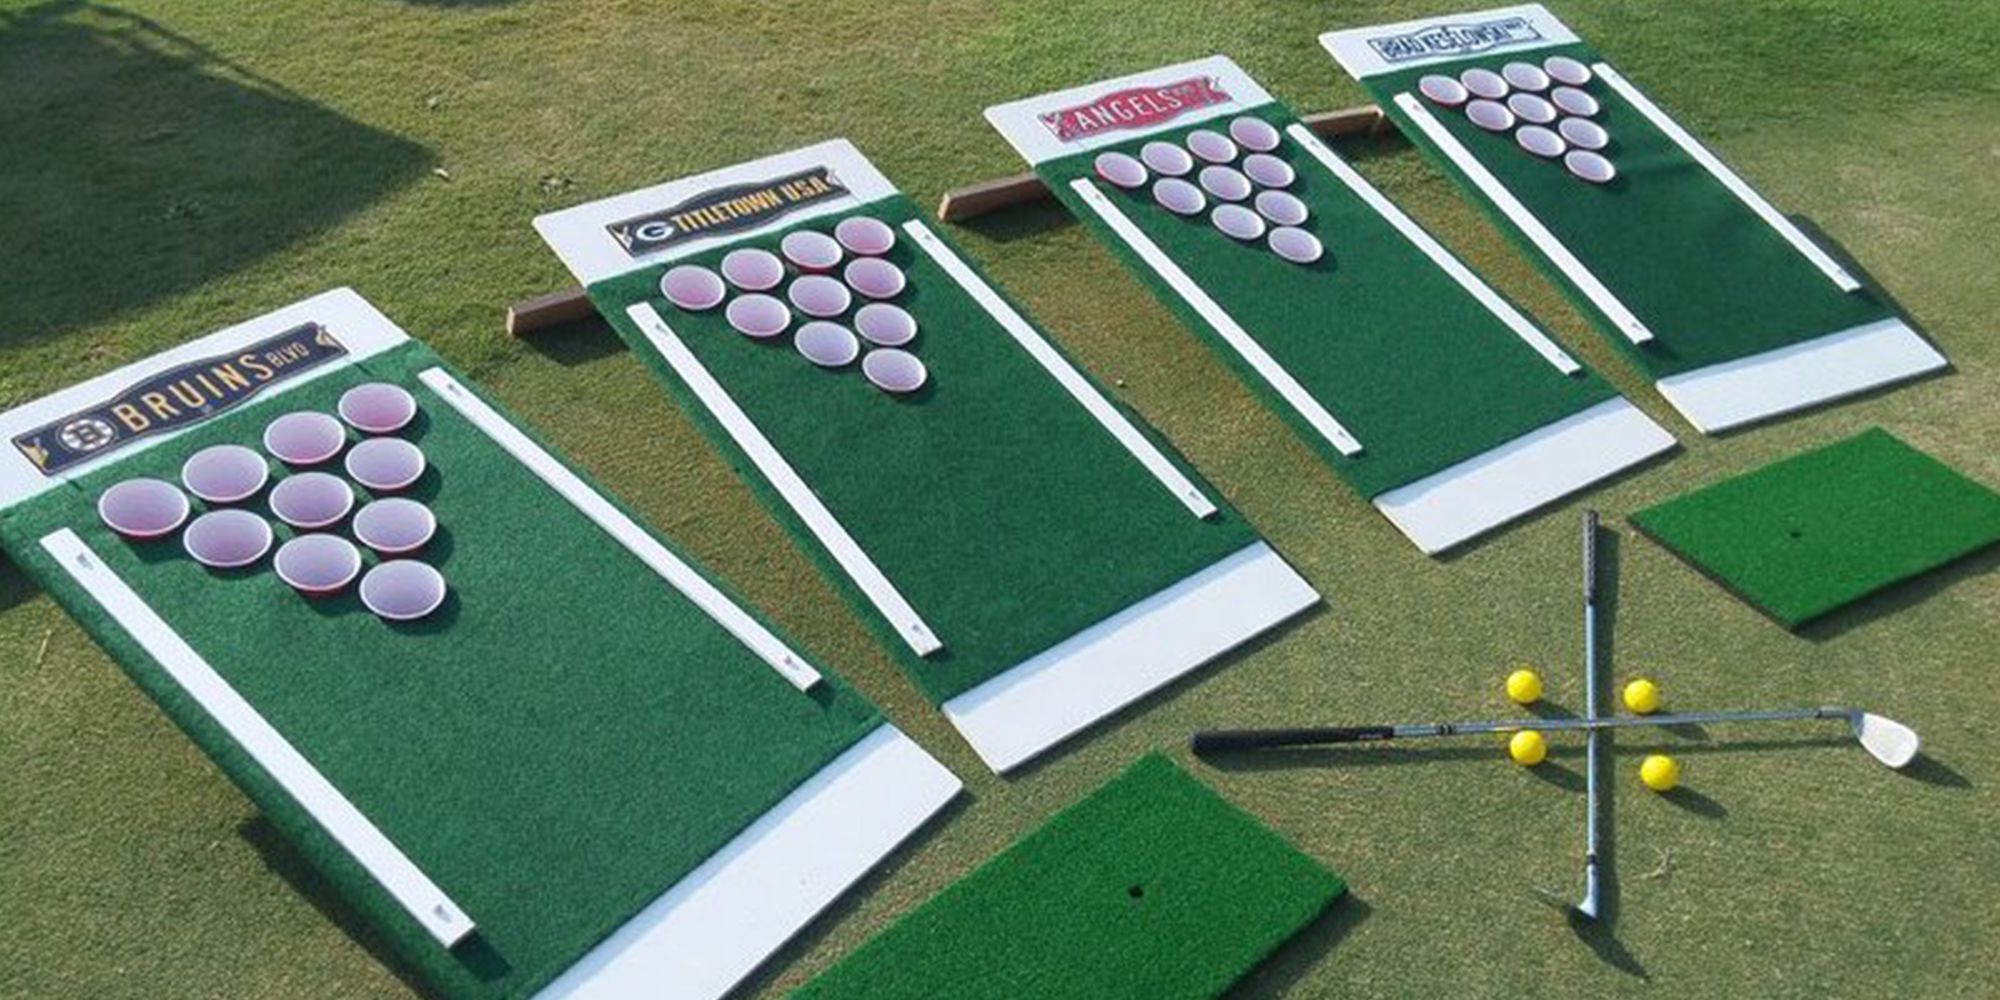 This Beer Pong Golf Set Is the Ultimate Drinking Game, So You Better Work  on Your Putt